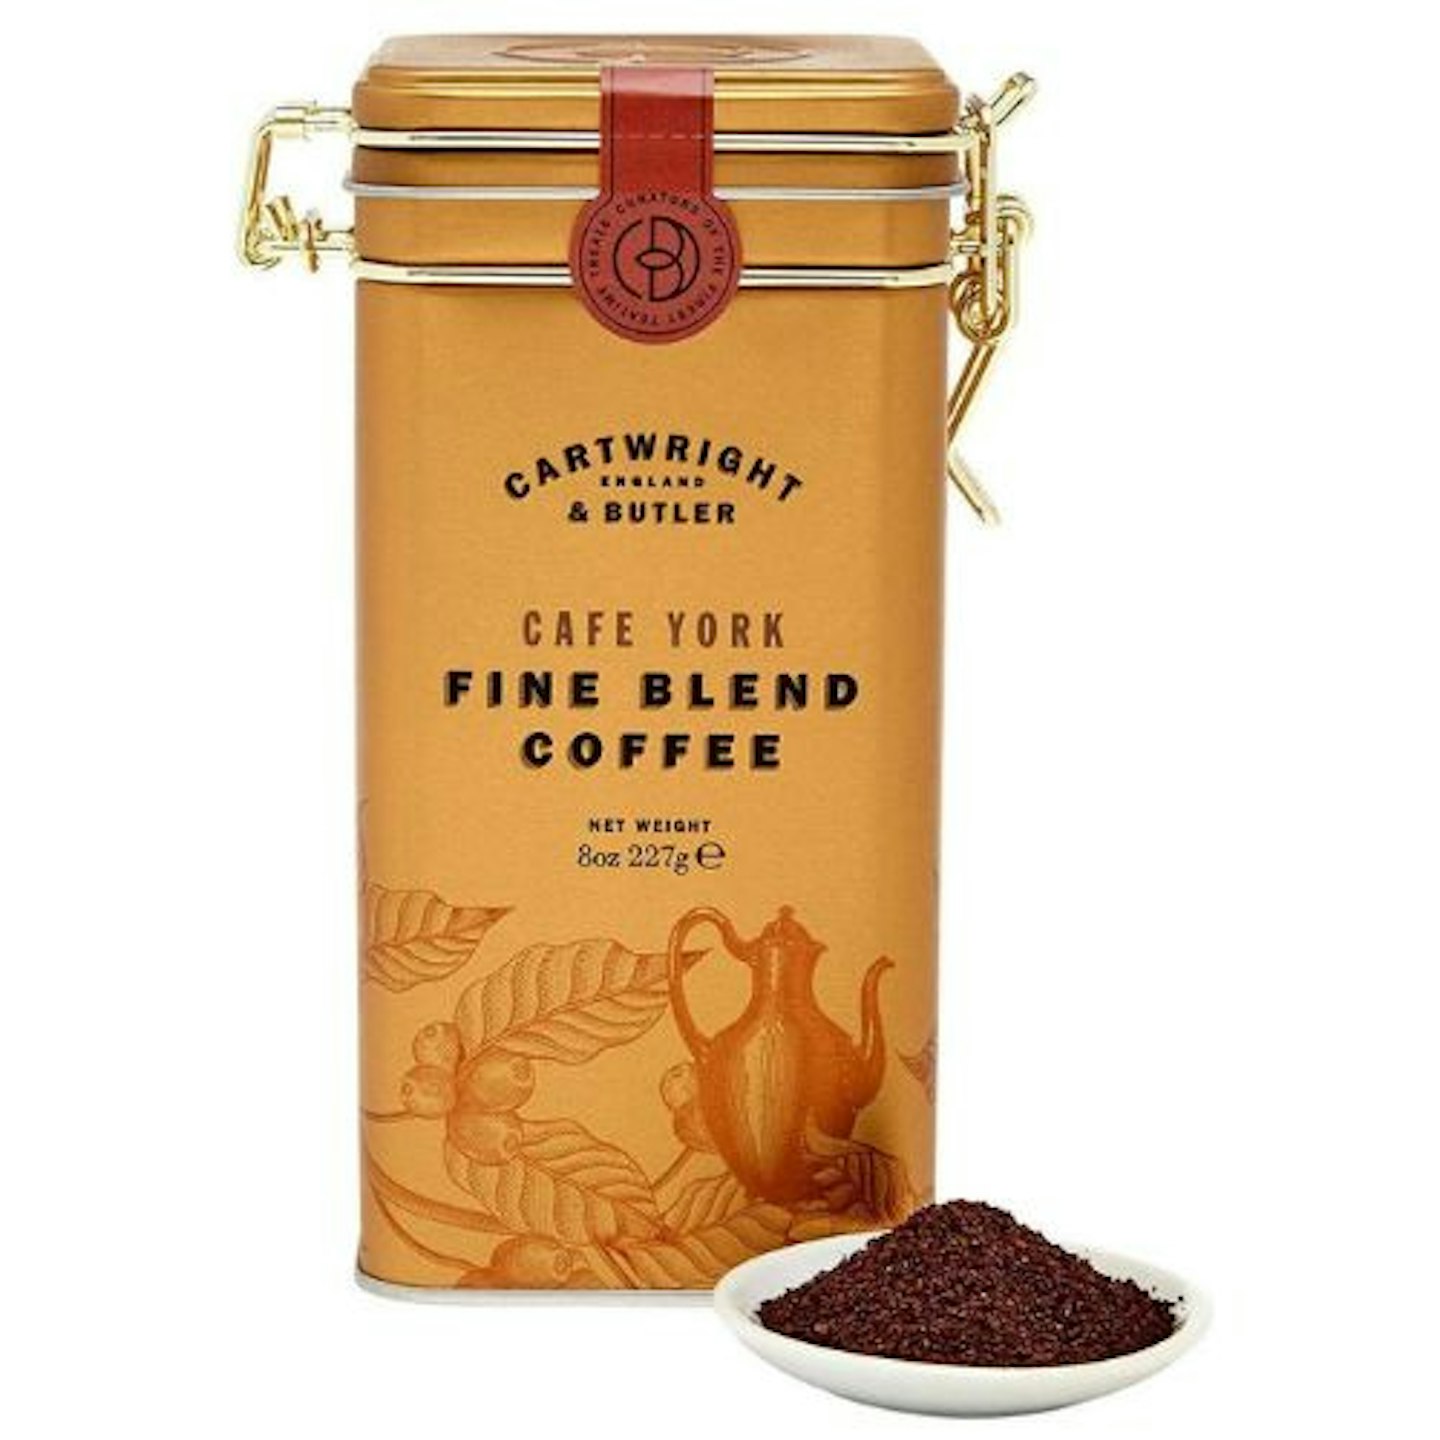 Cartwright and Butler Cafe York Fine Blend Coffee